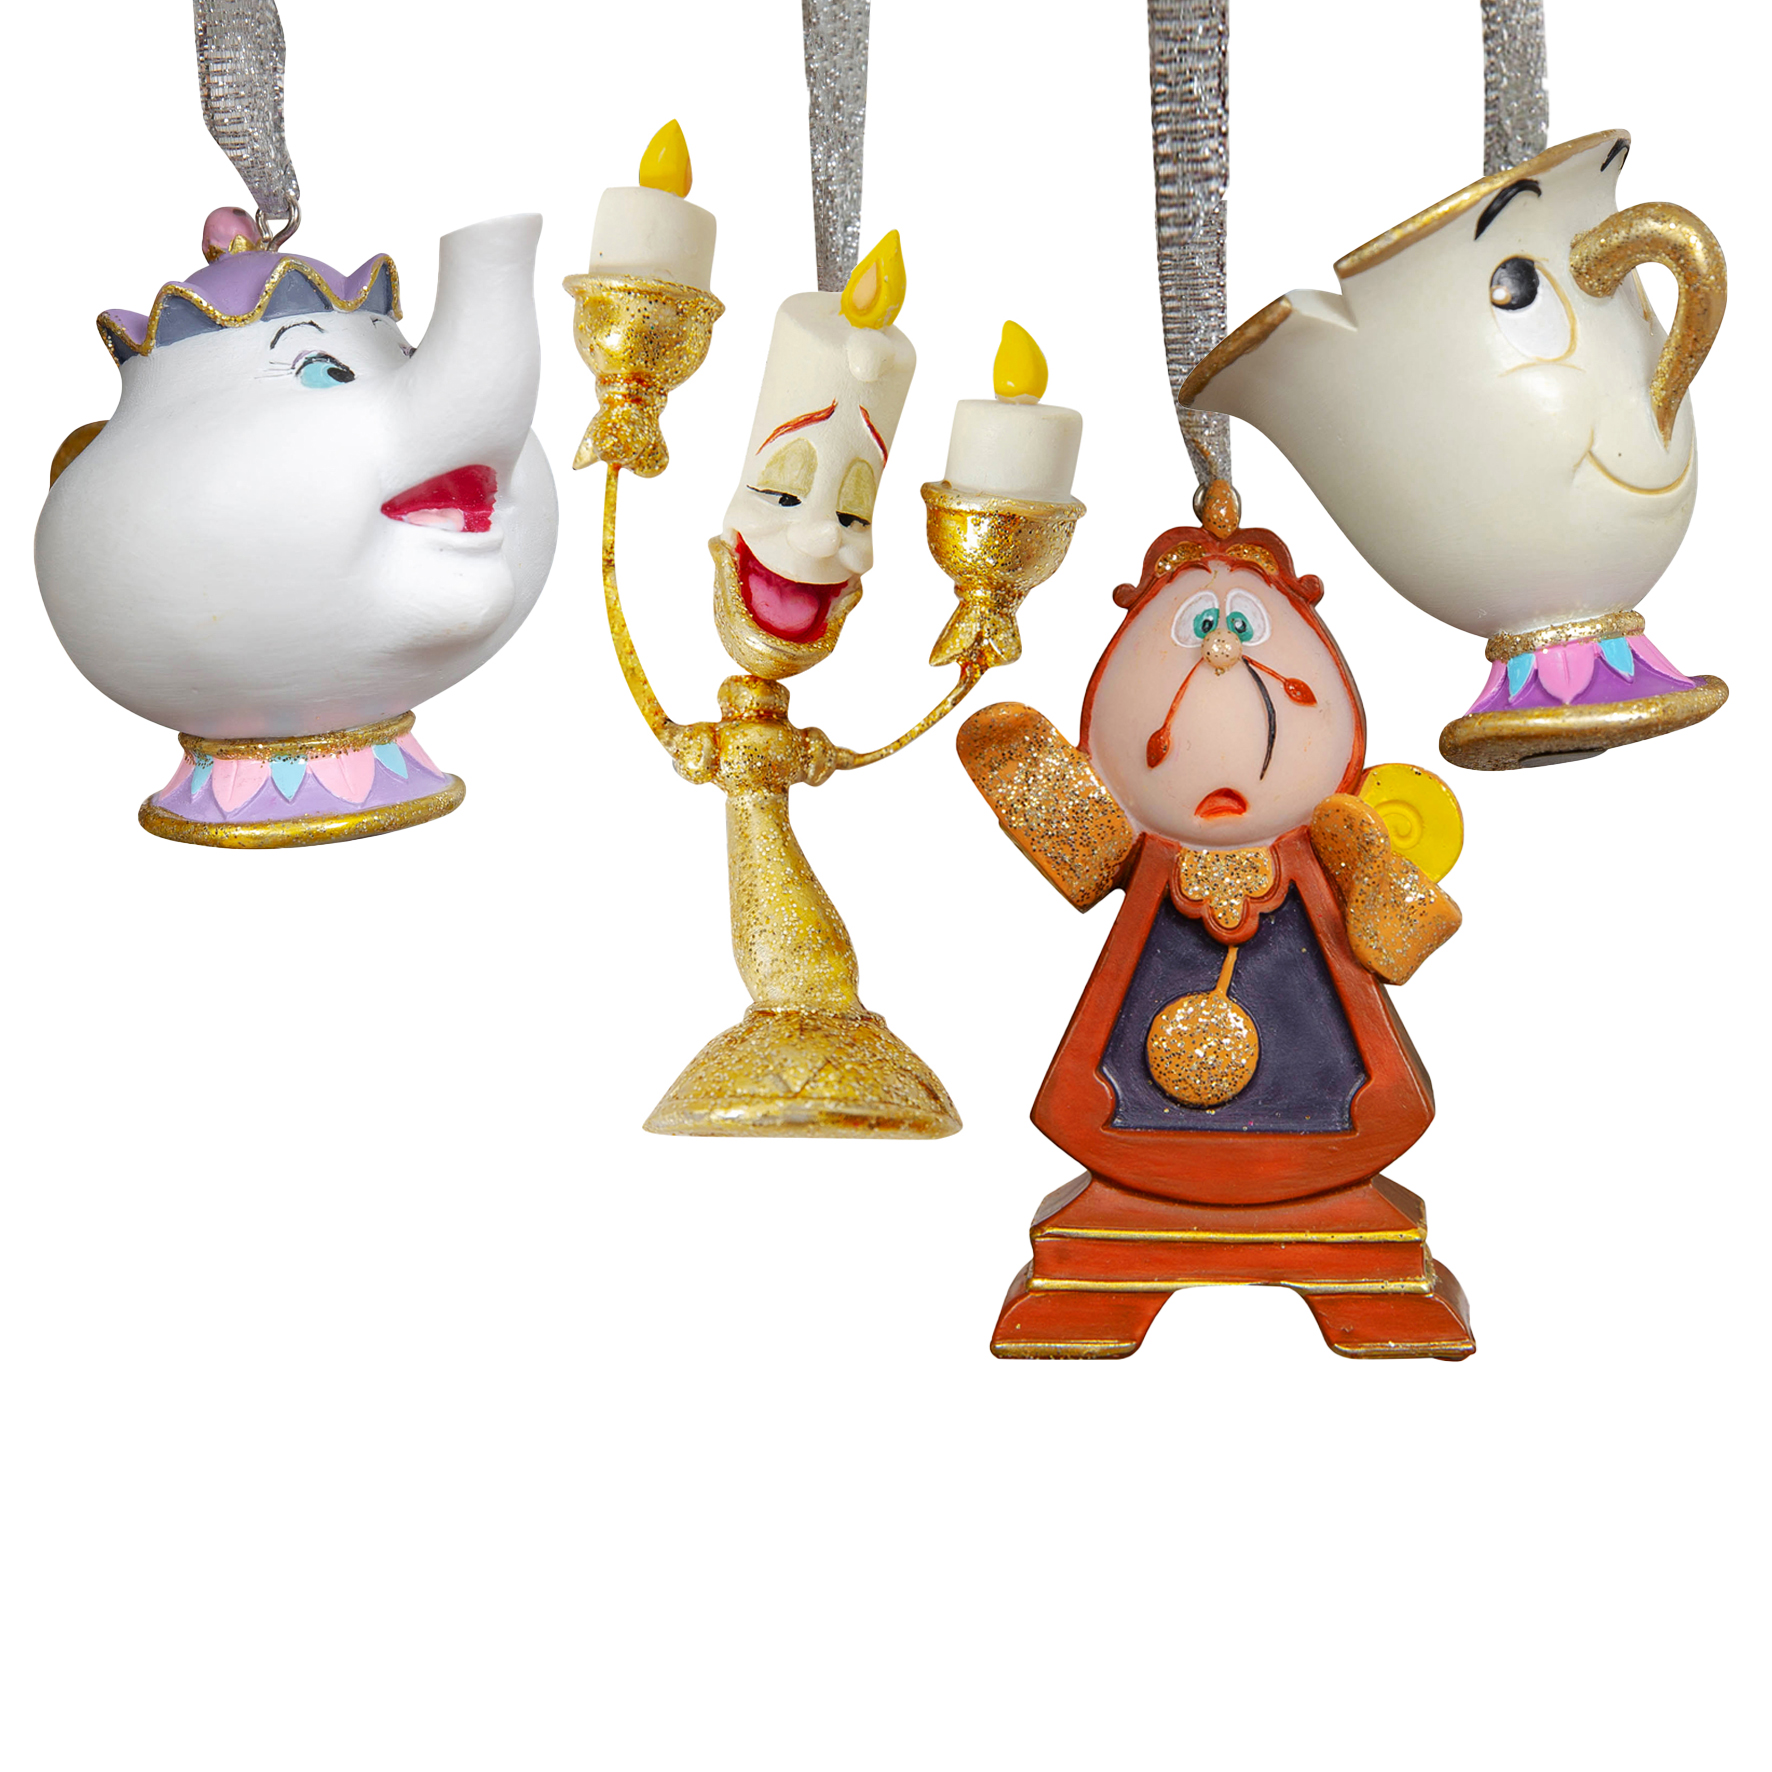 Widdop Beauty and the Beast Disney Christmas Tree Decorations